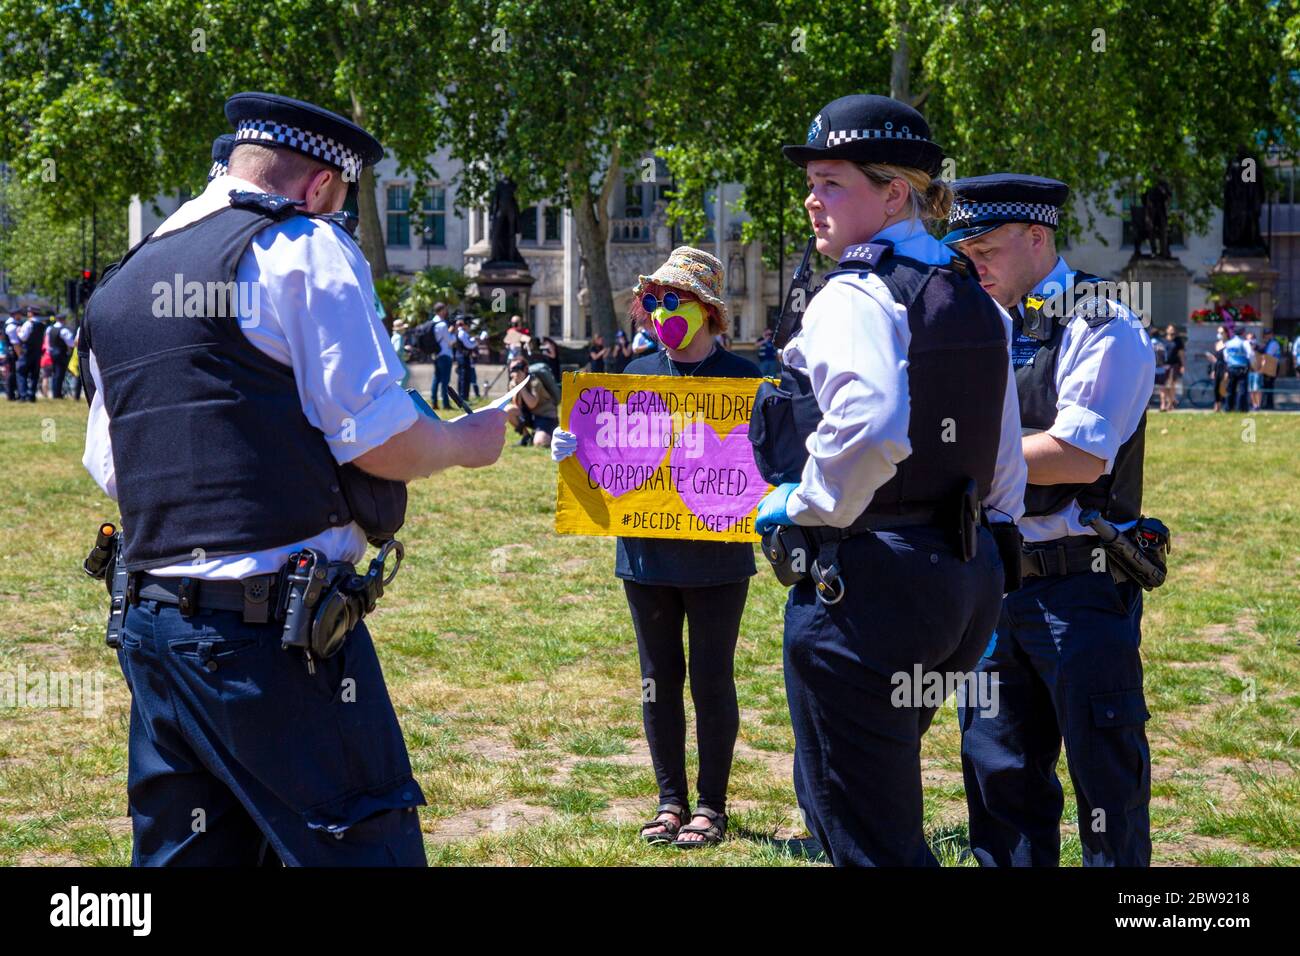 30 May 2020 London, UK - Extinction Rebellion stage silent socially-distanced climate change protest in Westminster, protesters being fined and taken away by police for breaching coronavirus regulations, police officers writing a fine ticket to a female protester in face mask Stock Photo